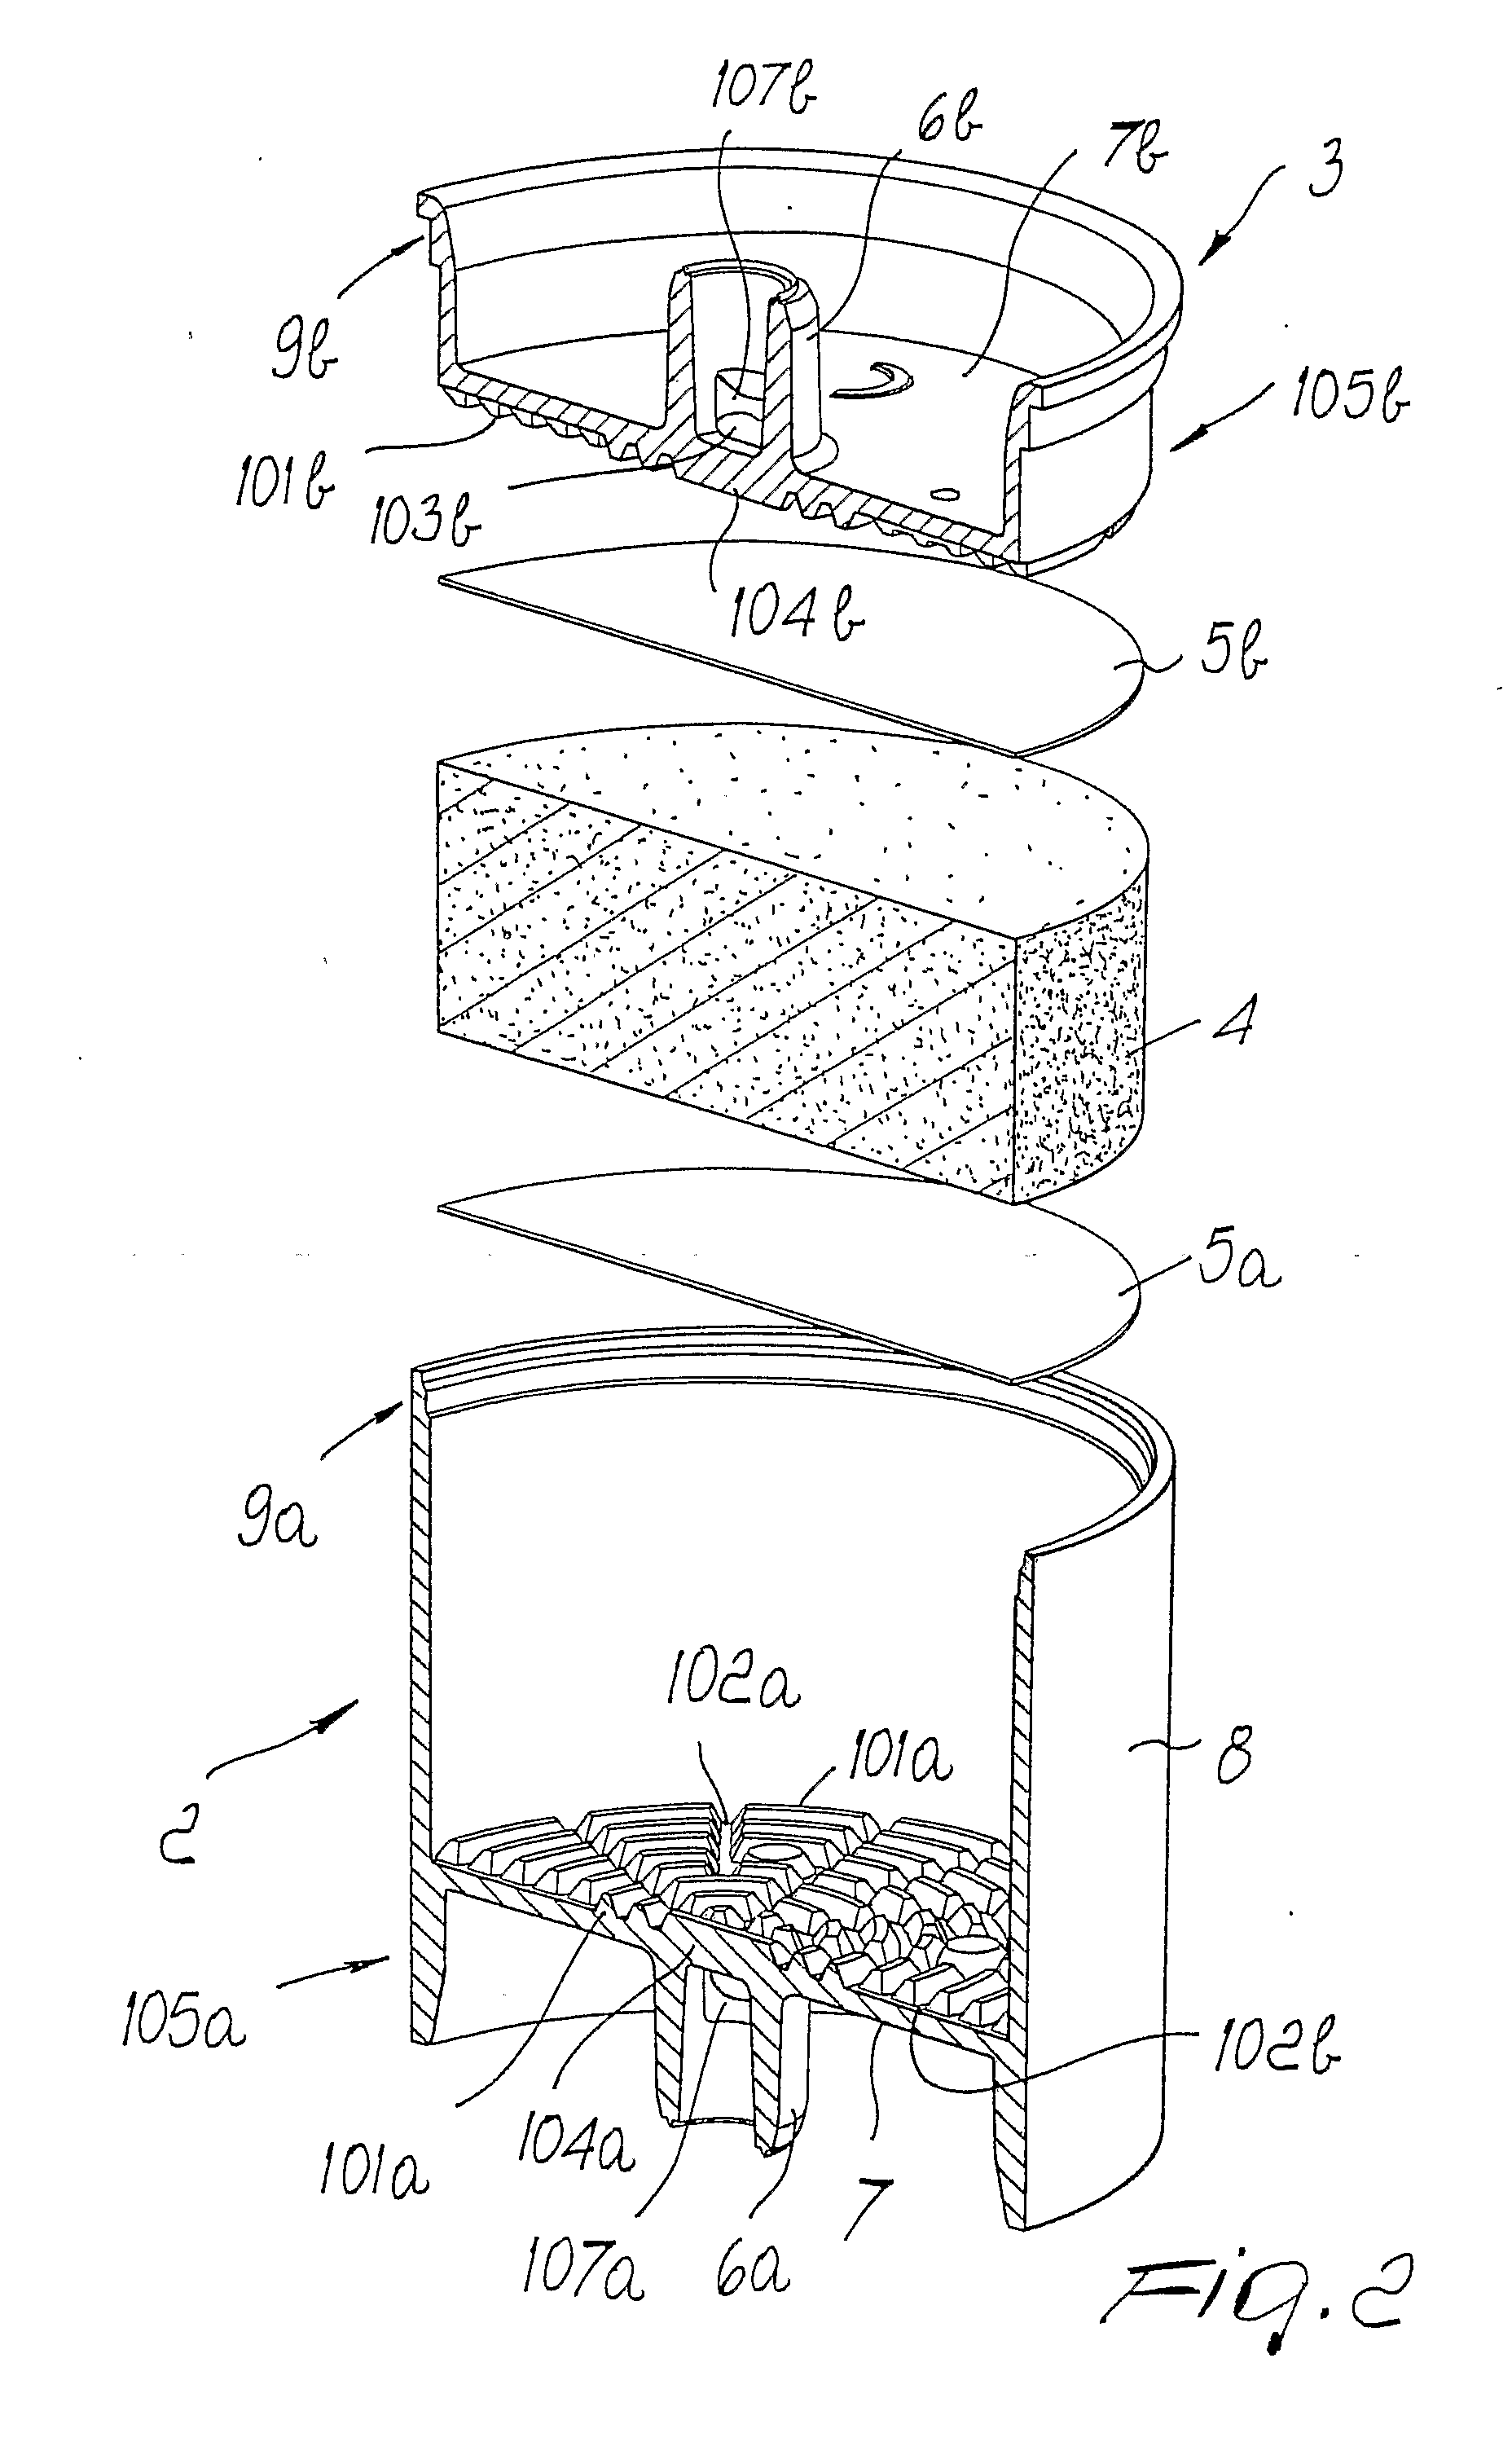 Beverage extraction assembly for extracting a beverage from a particulate substance contained in a cartridge